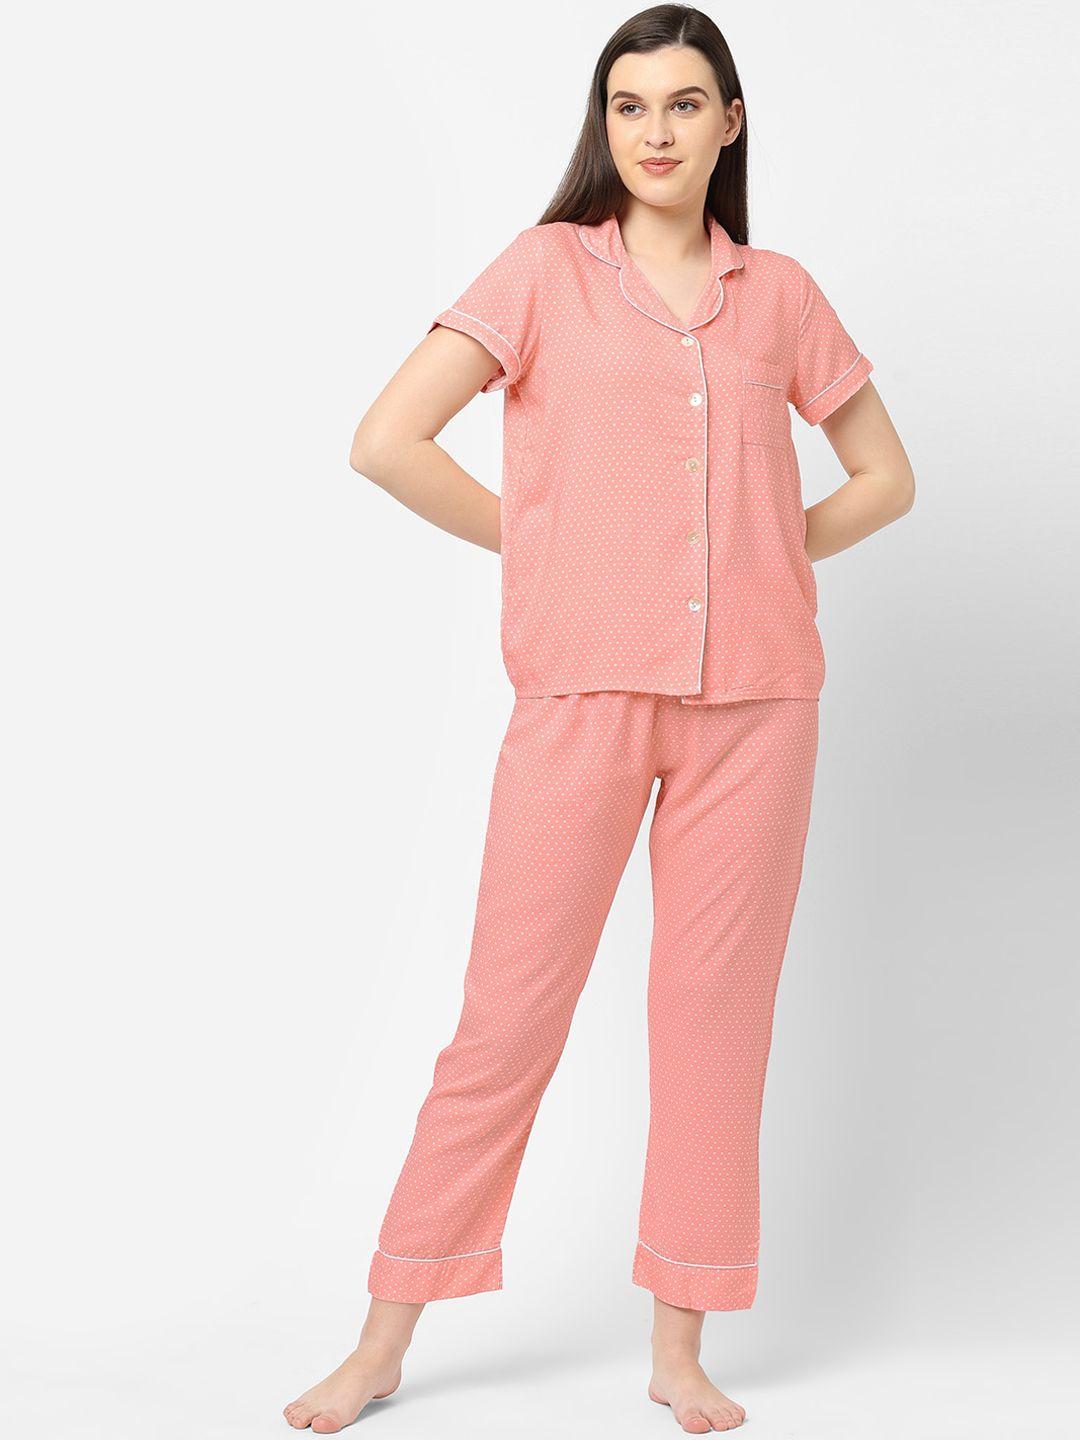 sweet-dreams-women-peach-coloured-&-white-printed-night-suit